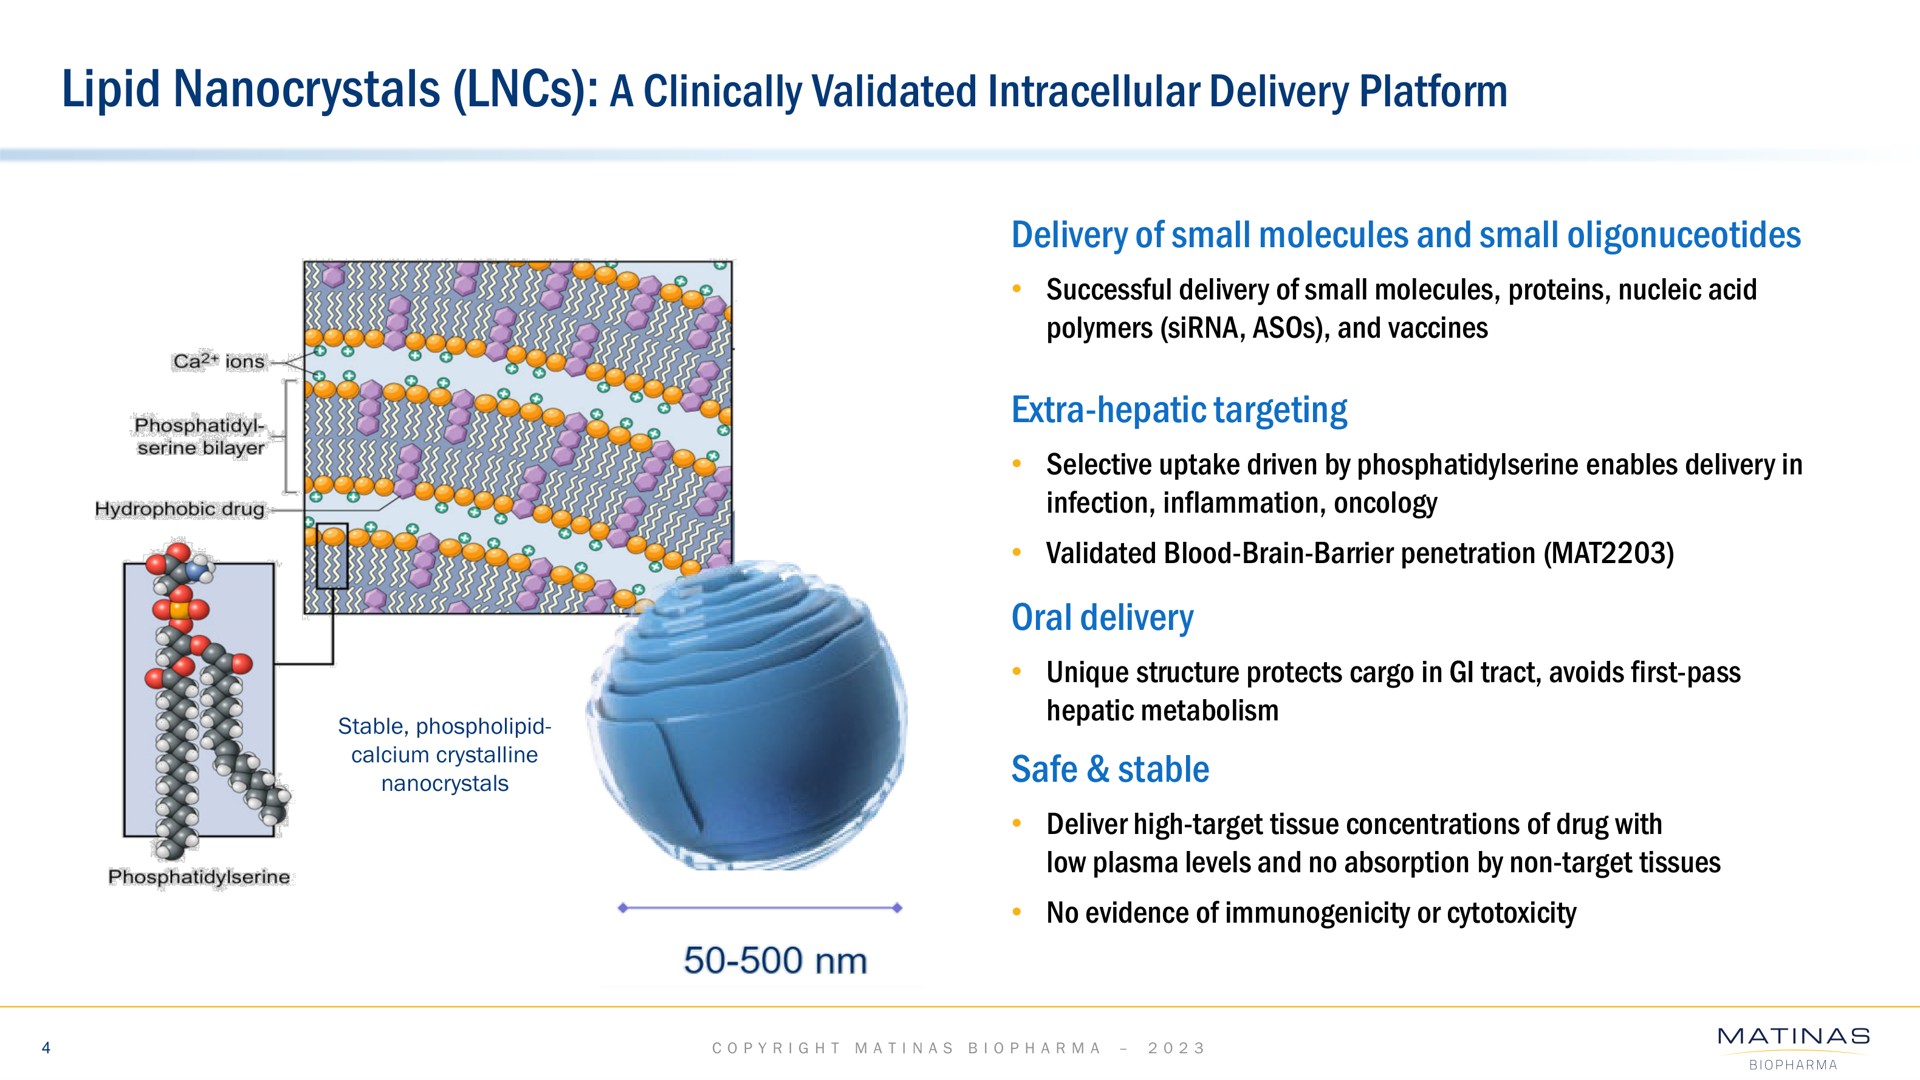 a clinically validated intracellular delivery platform | Matinas BioPharma